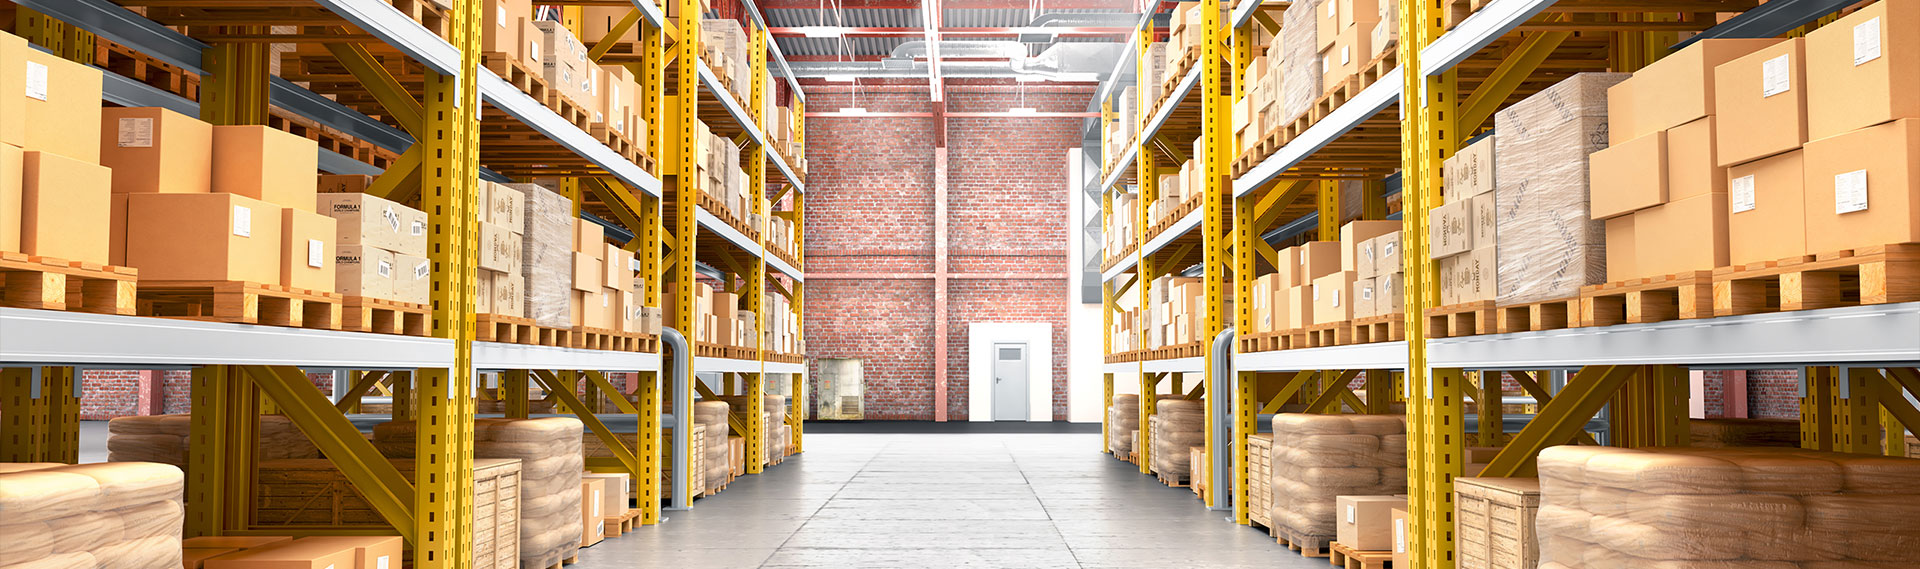 What to Look For When Scouting for Storage Facilities